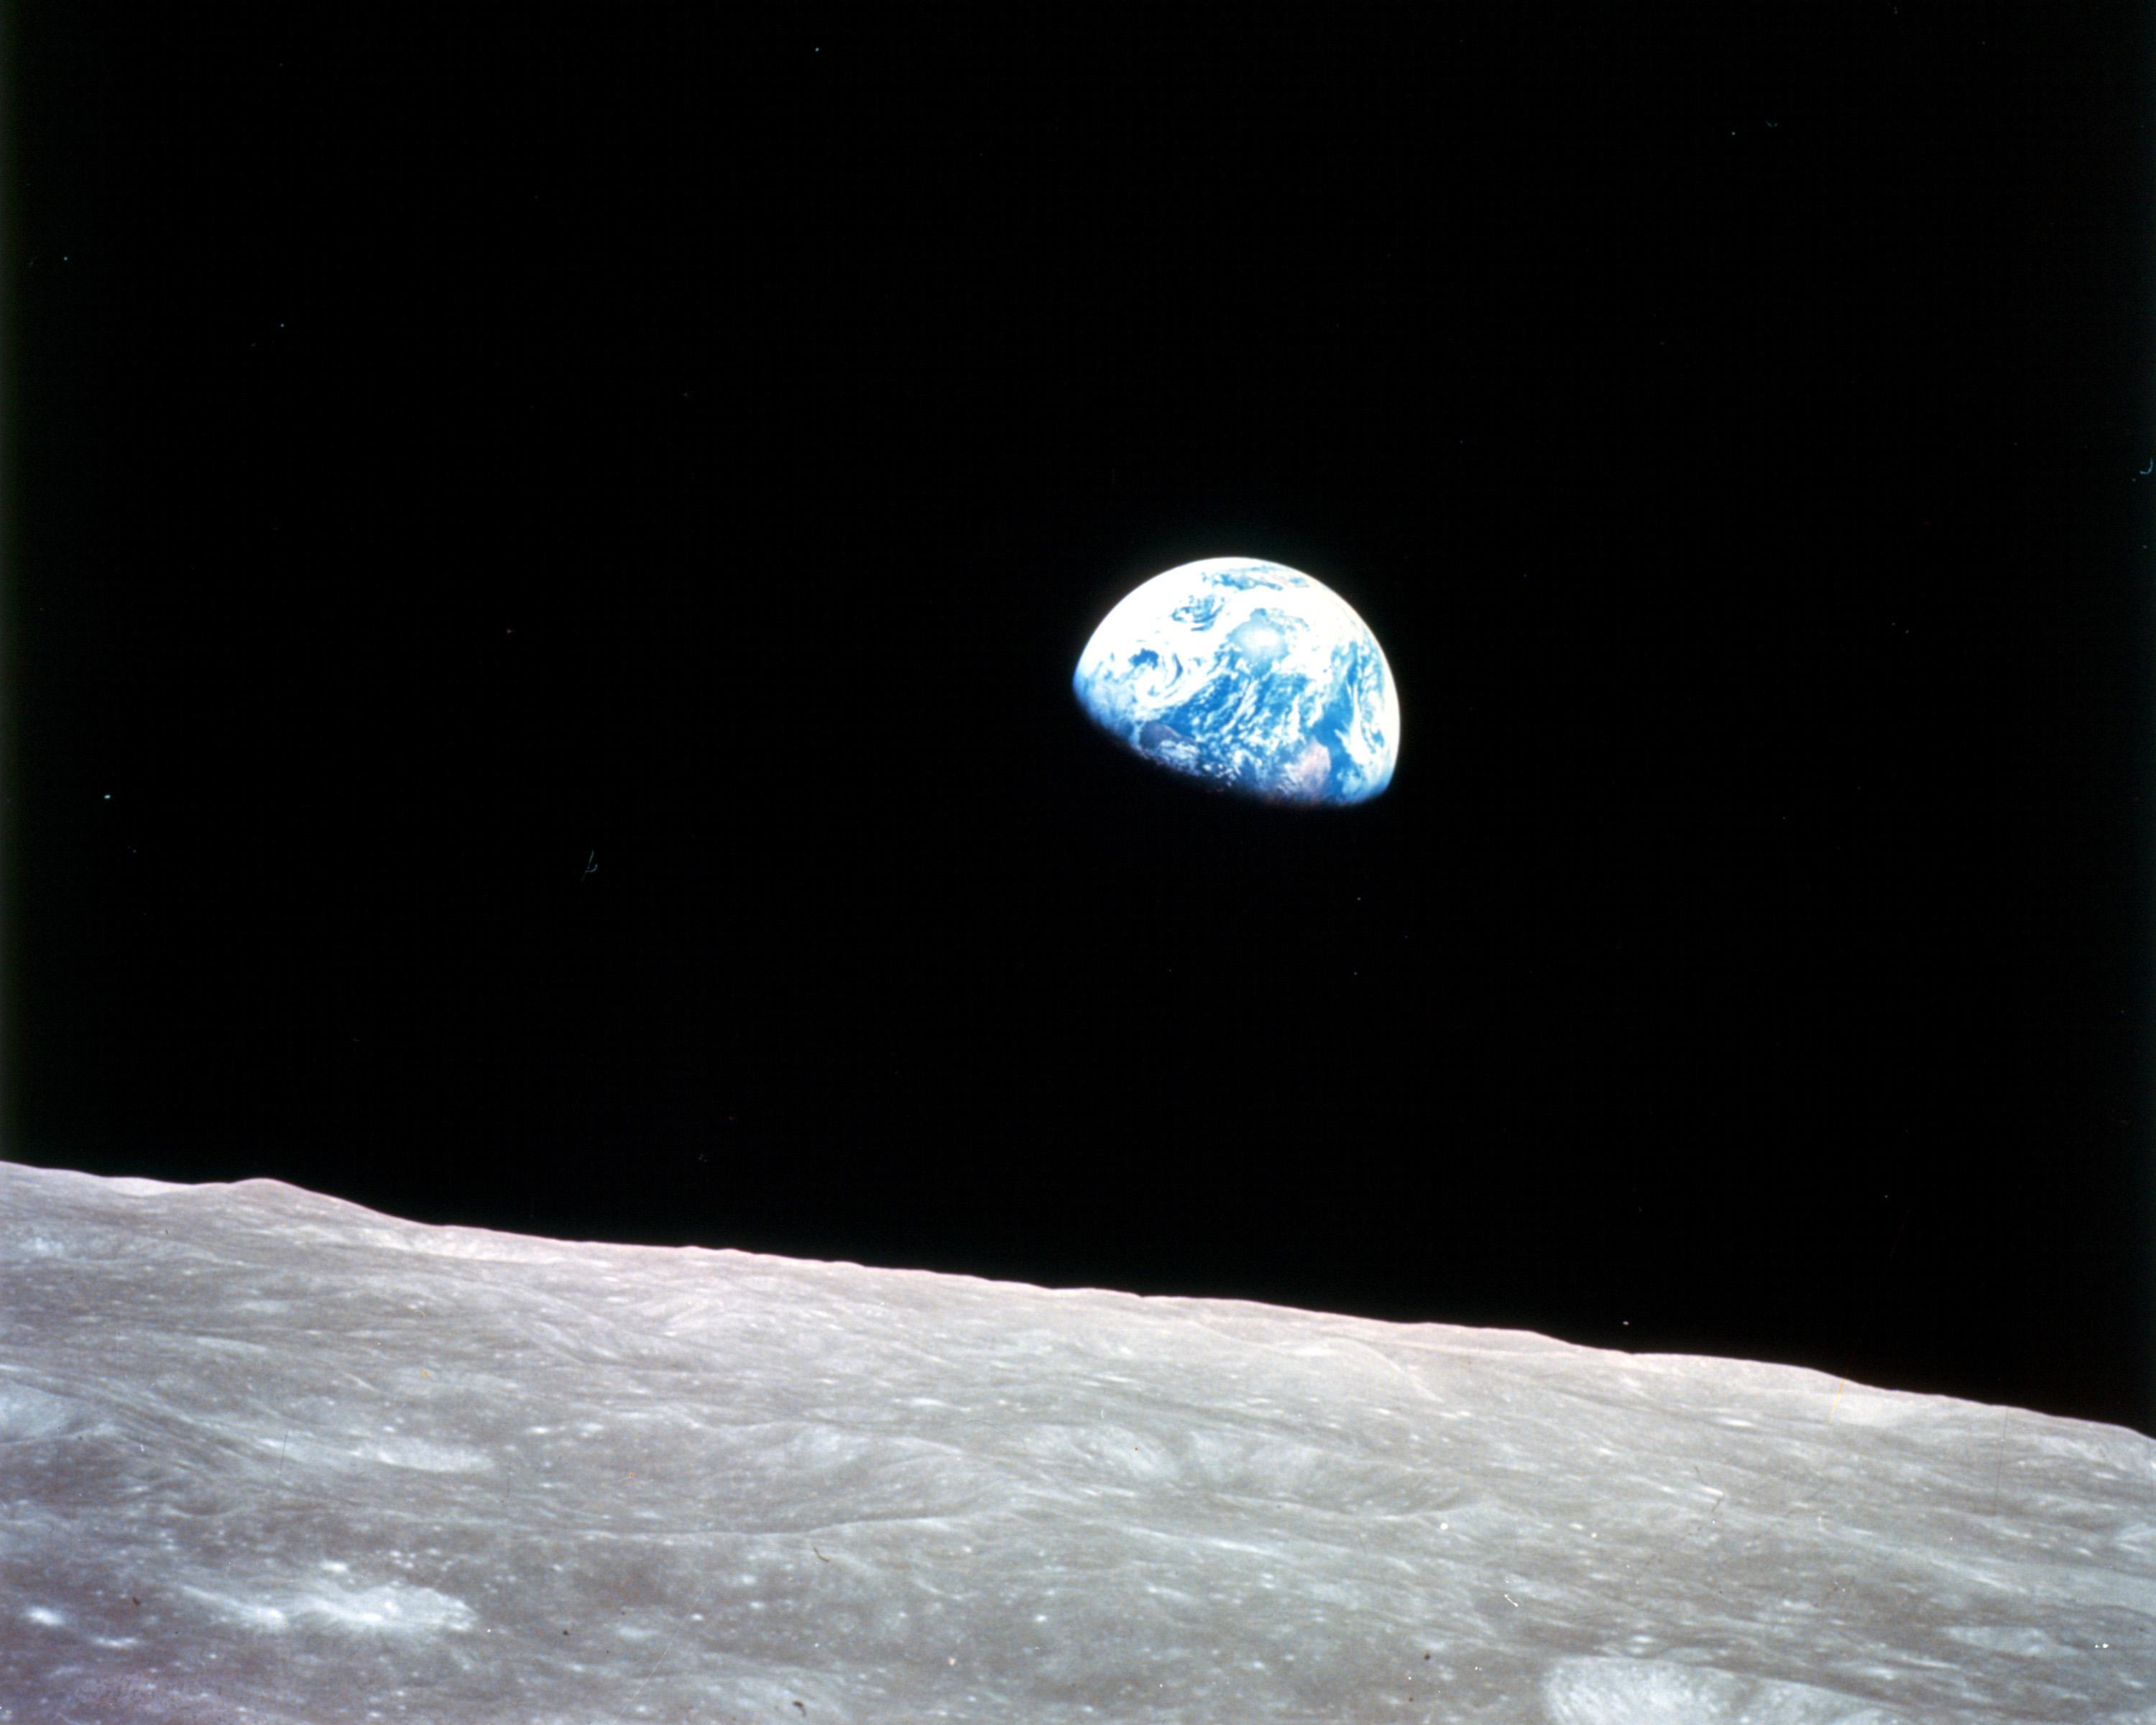 the earth rises above the moon's surface in the darkness of space